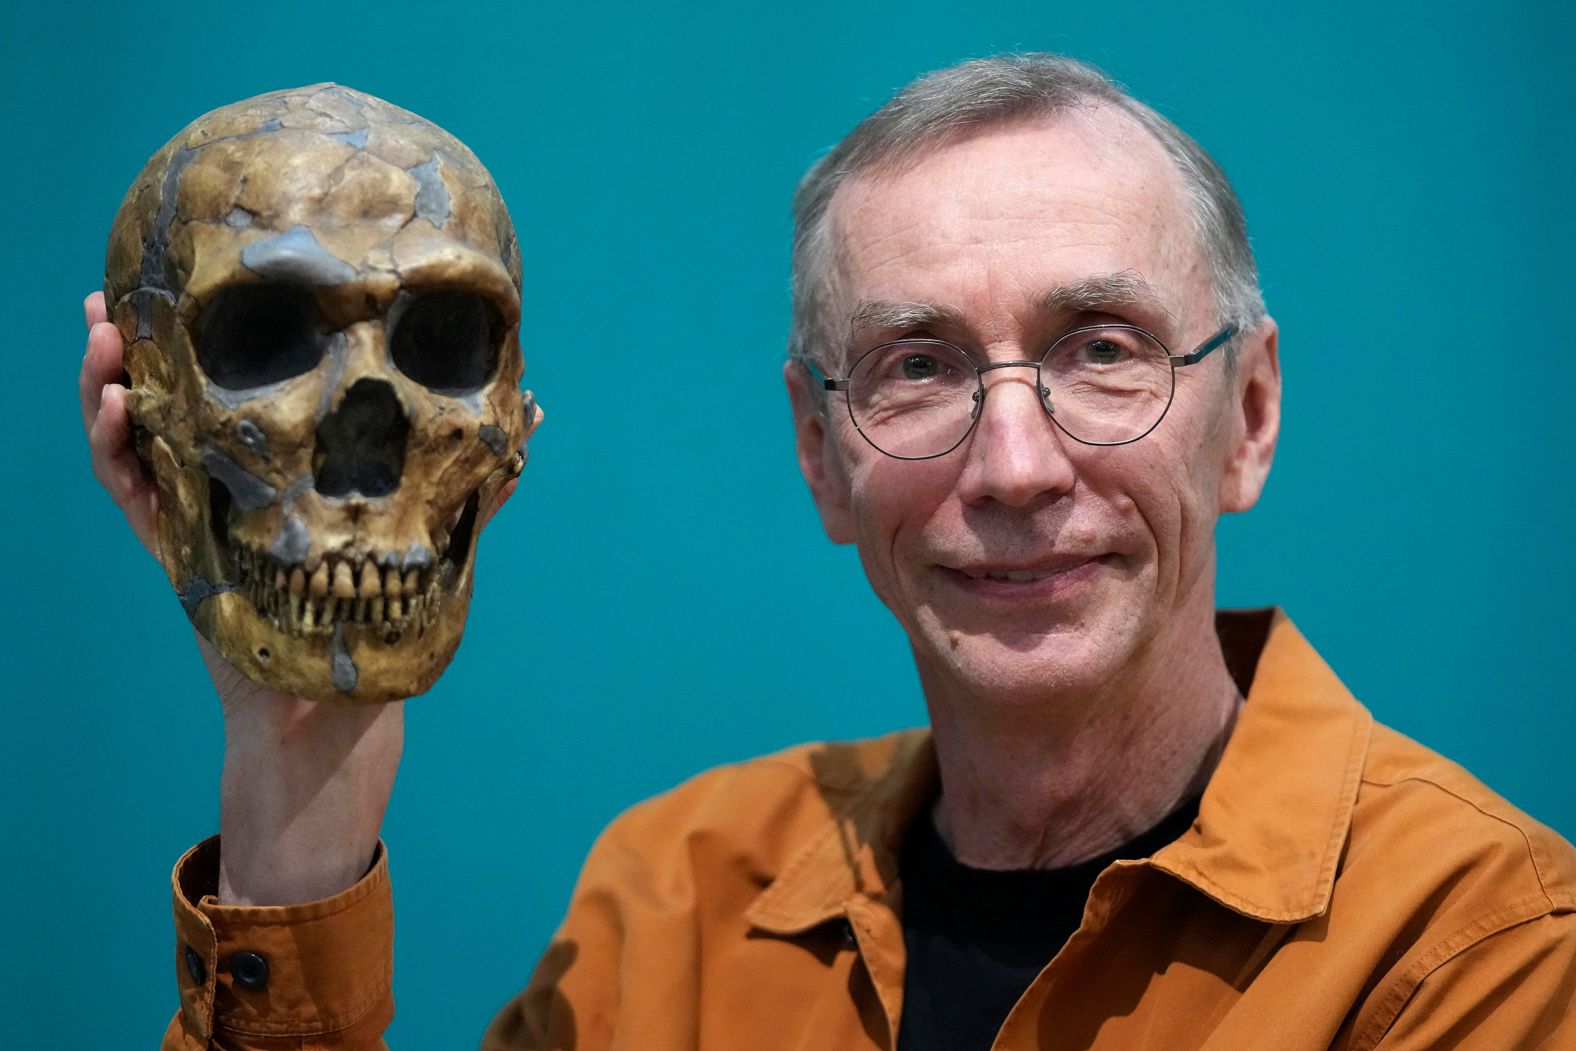 Swedish geneticist Svante Paabo poses with a replica of a Neanderthal skeleton in Leipzig, Germany, on Monday, October 3. He was awarded the <a href="https://www.cnn.com/2022/10/03/europe/nobel-prize-medicine-2022-winner-intl-scn" target="_blank">2022 Nobel Prize for medicine</a> for pioneering the use of ancient DNA to unlock secrets about human evolution.